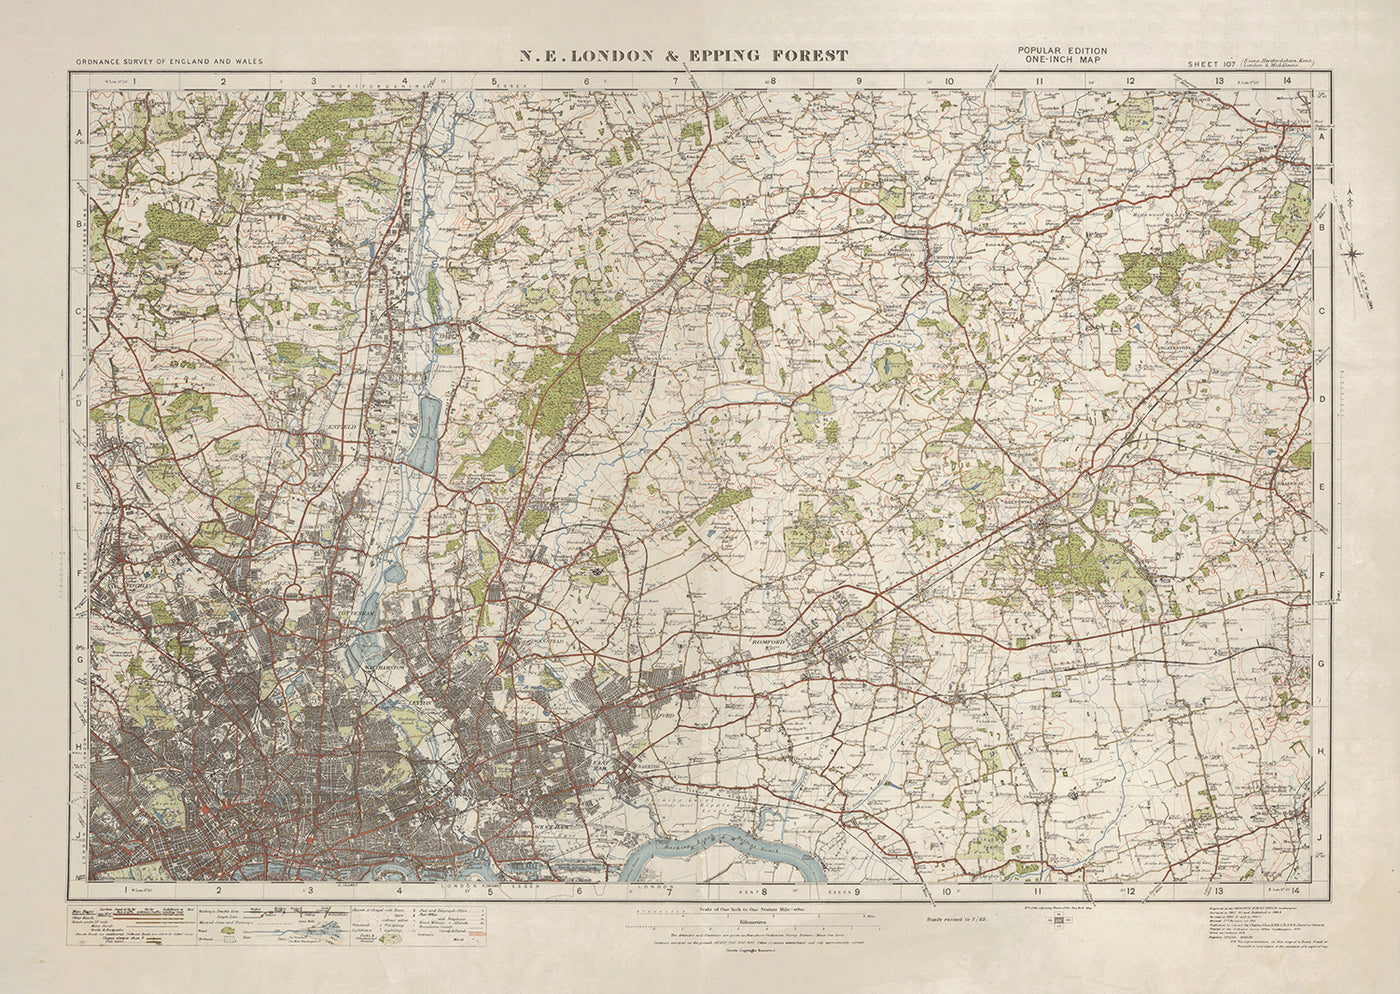 Old Ordnance Survey Map, Sheet 107 - N.E. London & Epping Forest, 1925: Brentwood, Romford, West Ham, Enfield, Finchley